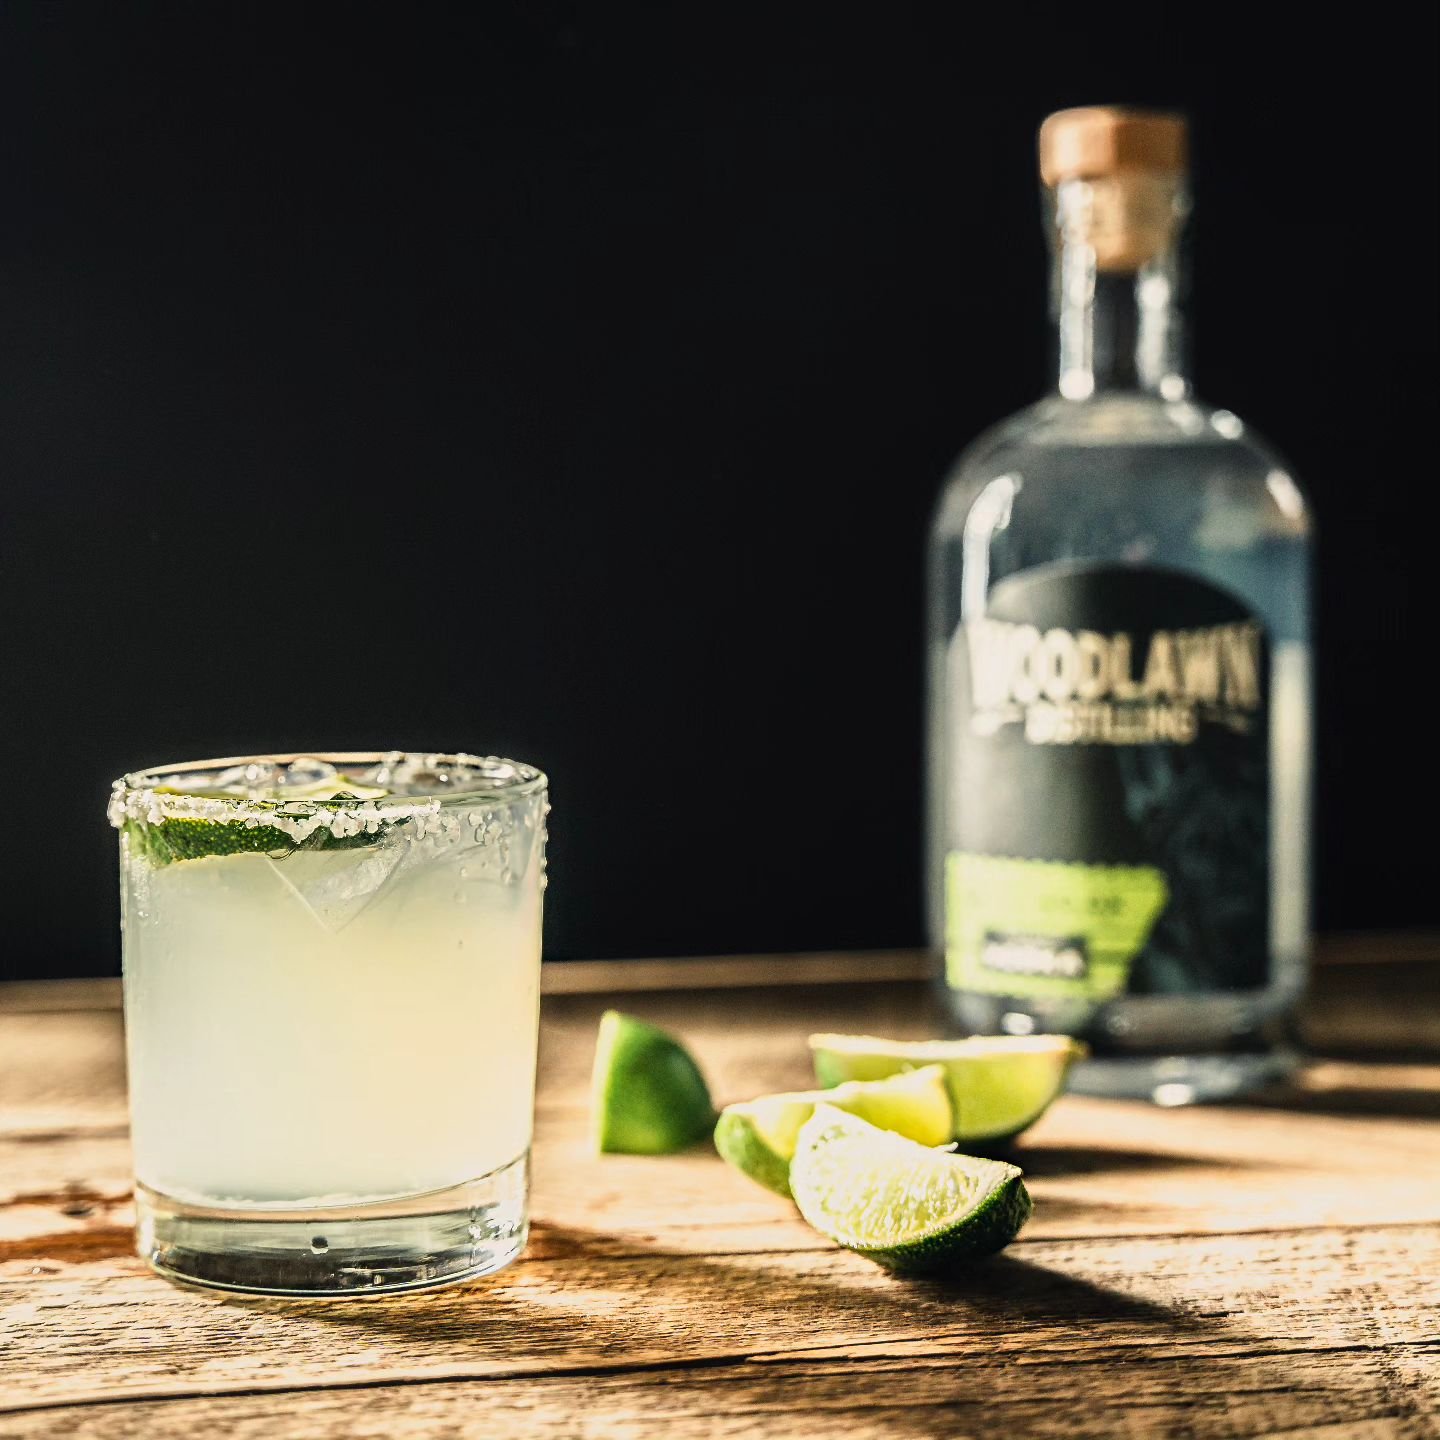 Did you know our Spicy Vodka Lemonade is our NY Farm Distillery spin on the Margarita? A little sweet, a little sour,  and a little salty, we really enjoy our NY version. Come on out this weekend to give it a try and celebrate Cinco de Mayo!